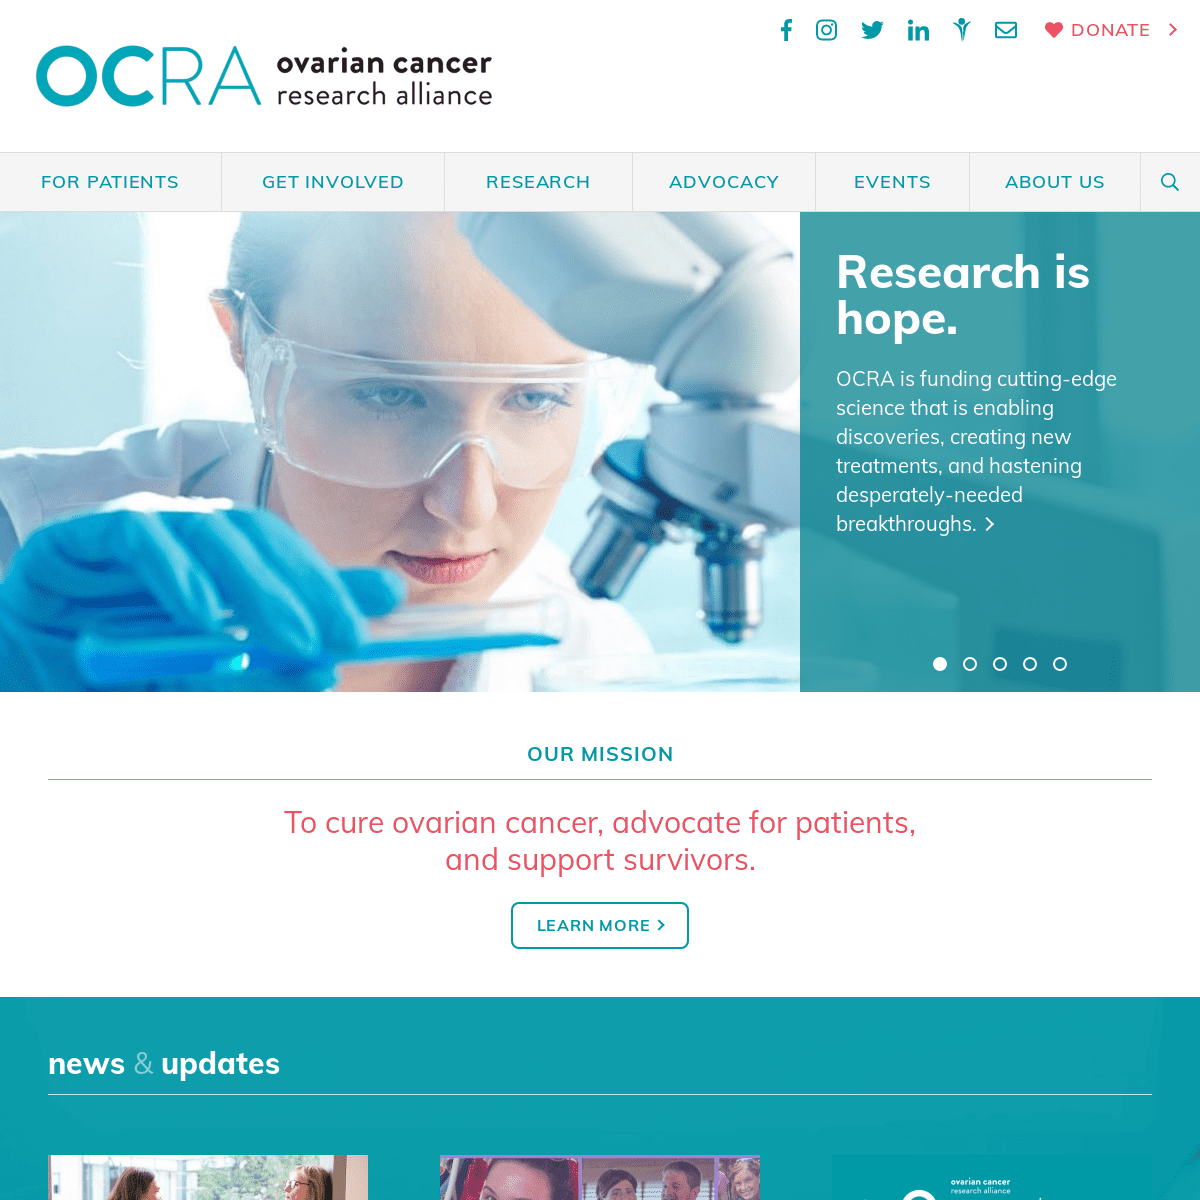 A complete backup of https://ocrfa.org